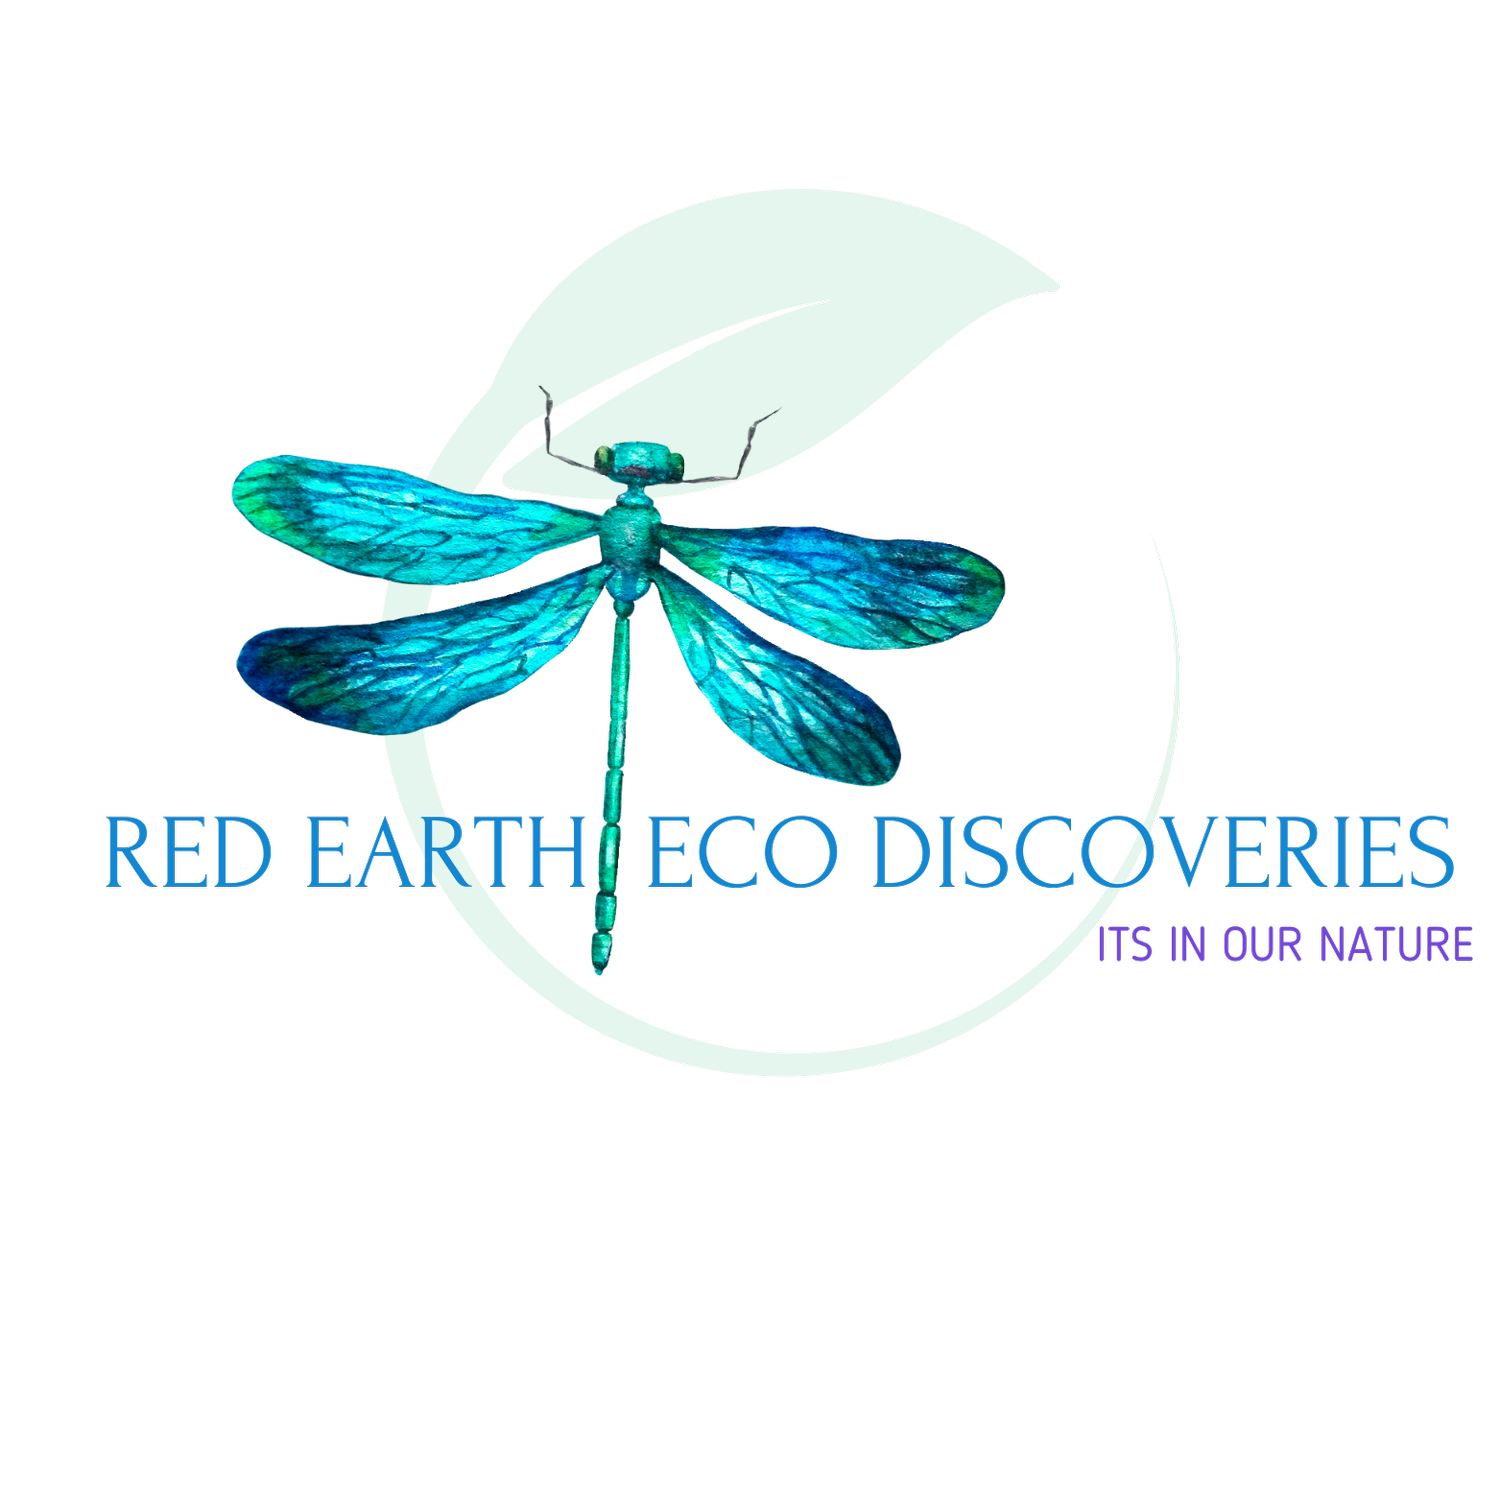 Red Earth Eco Discoveries